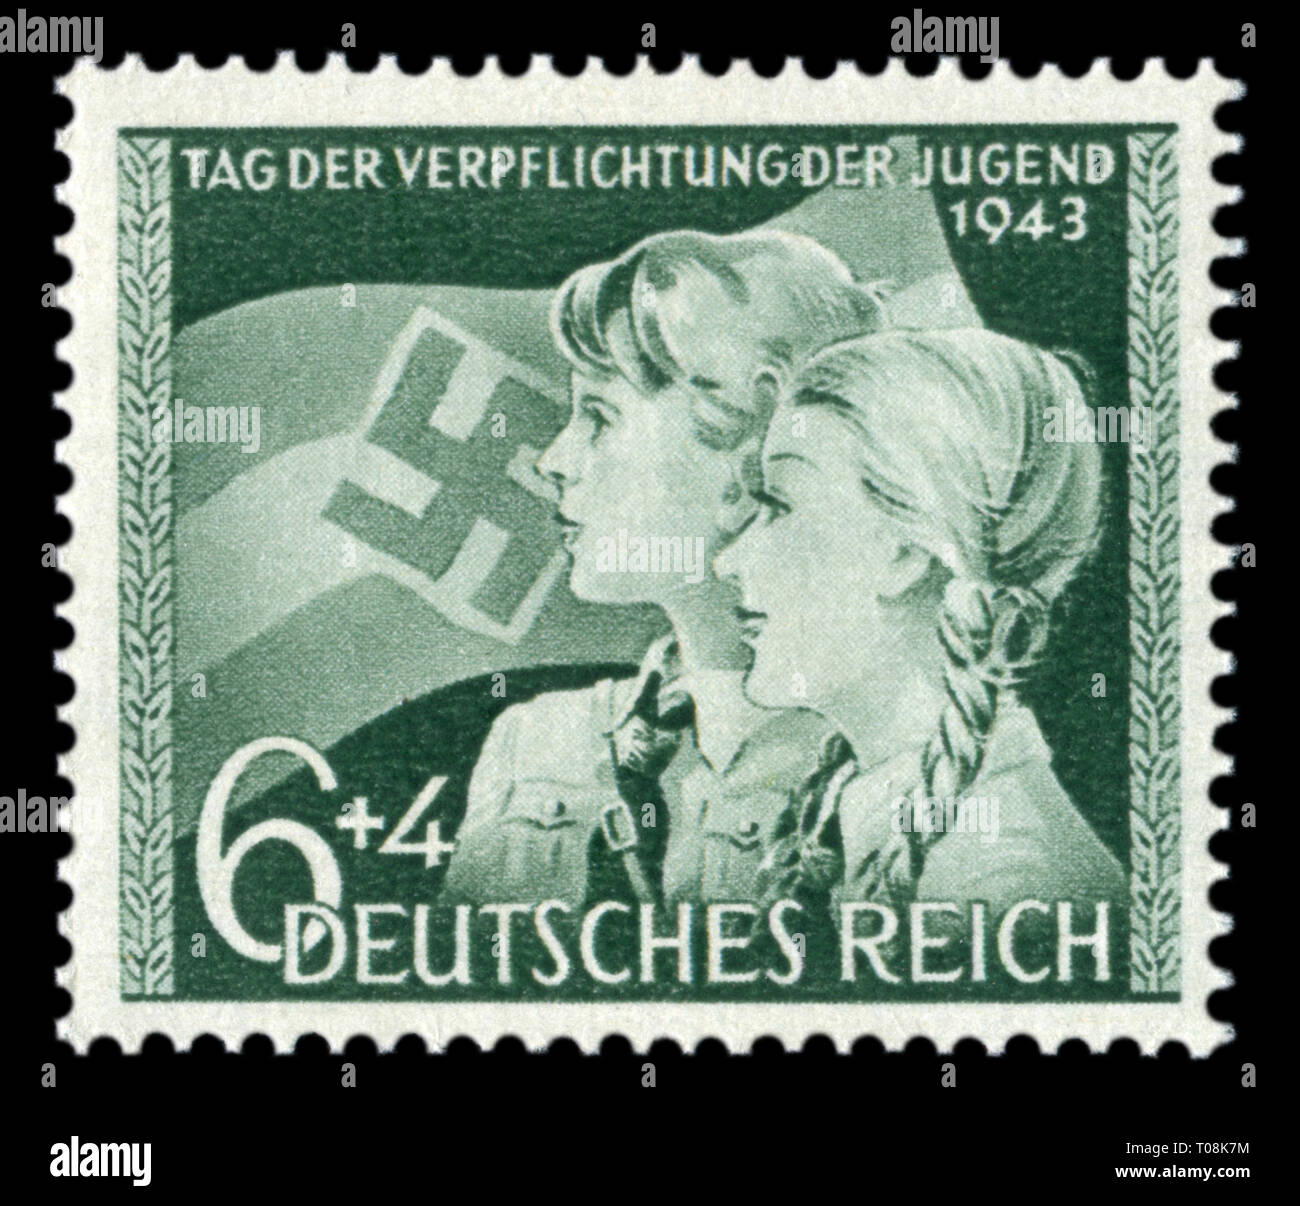 German historical stamp: Young boy and girl on the background of the Nazi flag. The day of the dedication of the youth in the units Deutsches jungvolk Stock Photo